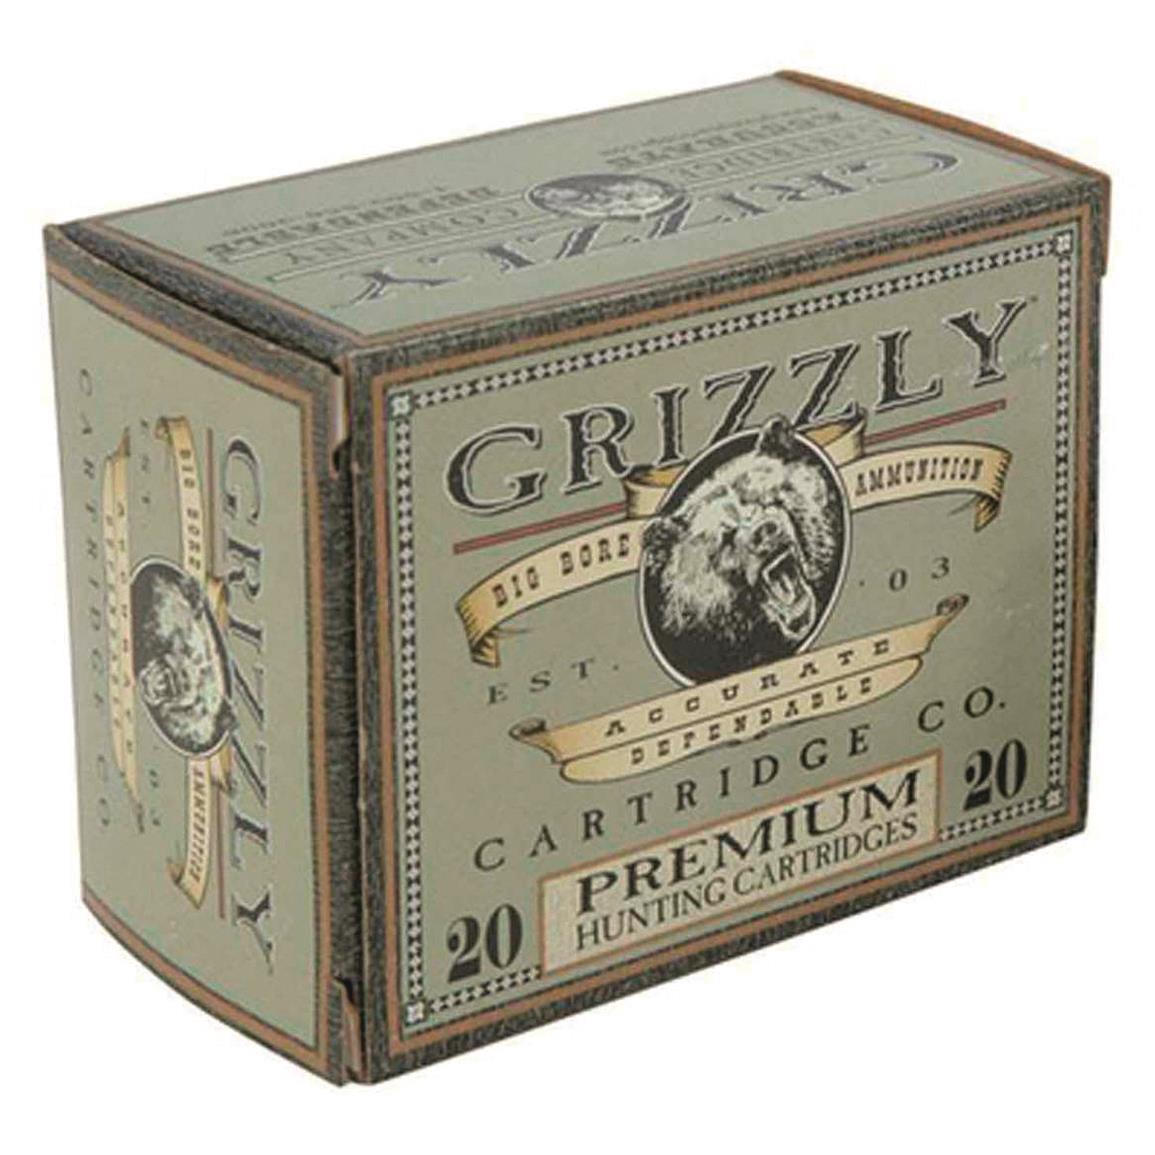 Grizzly Cartridge Co. Premium Hunting, .45-70 Gov't, LFNGC, 300 Grain, 20 Rounds